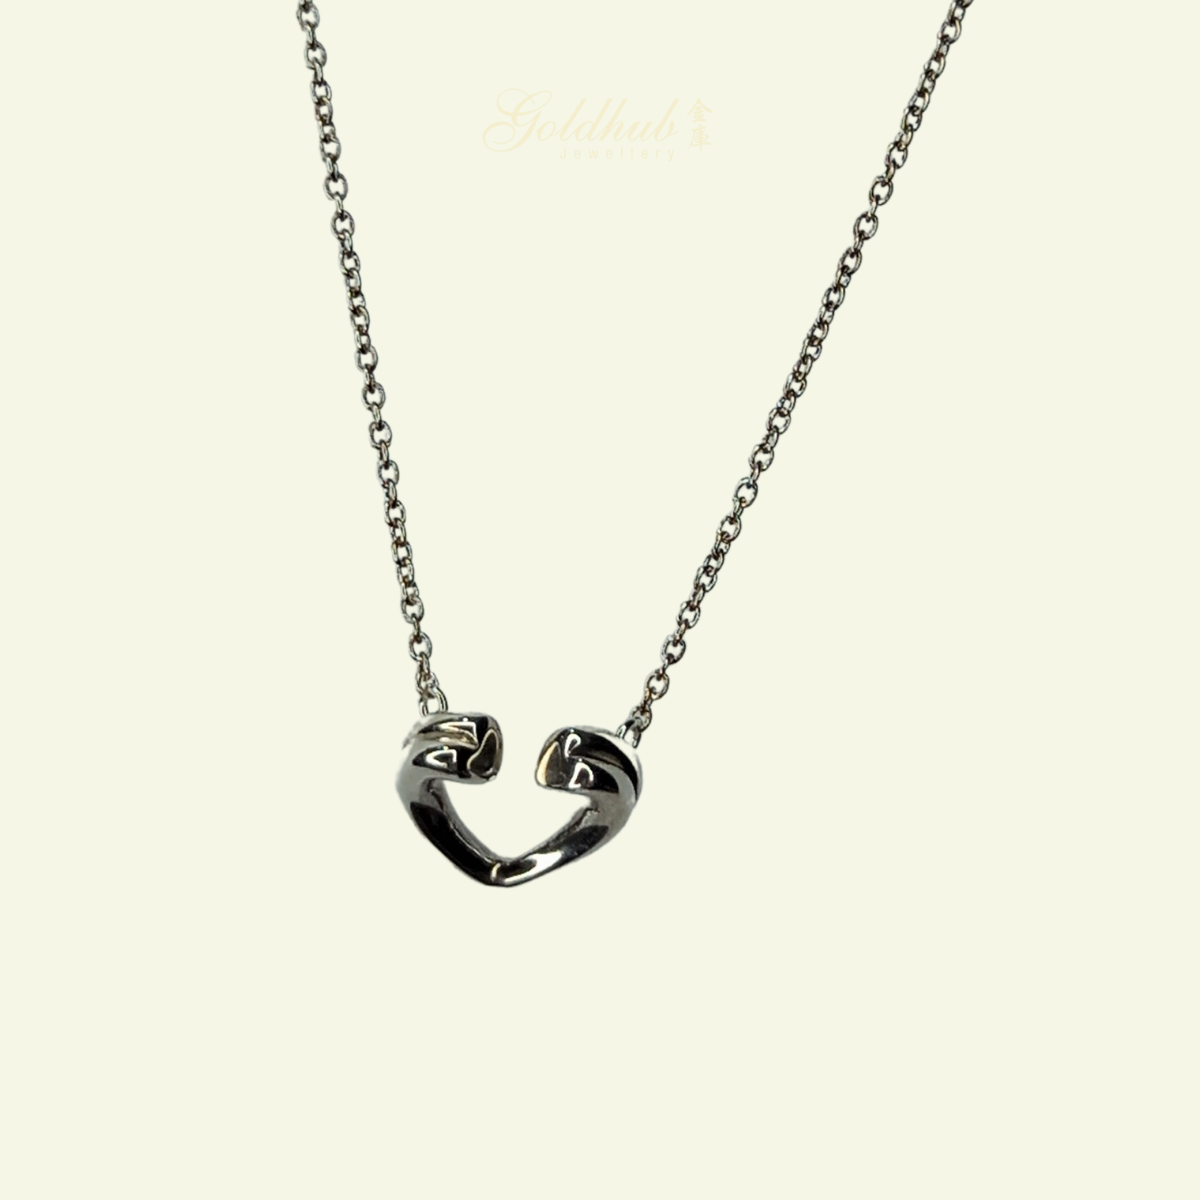 [FURTHER DISCOUNTED] 925 Pre-loved Tiffany & Co. Elsa Peretti Open Heart Necklace in Sterling Silver